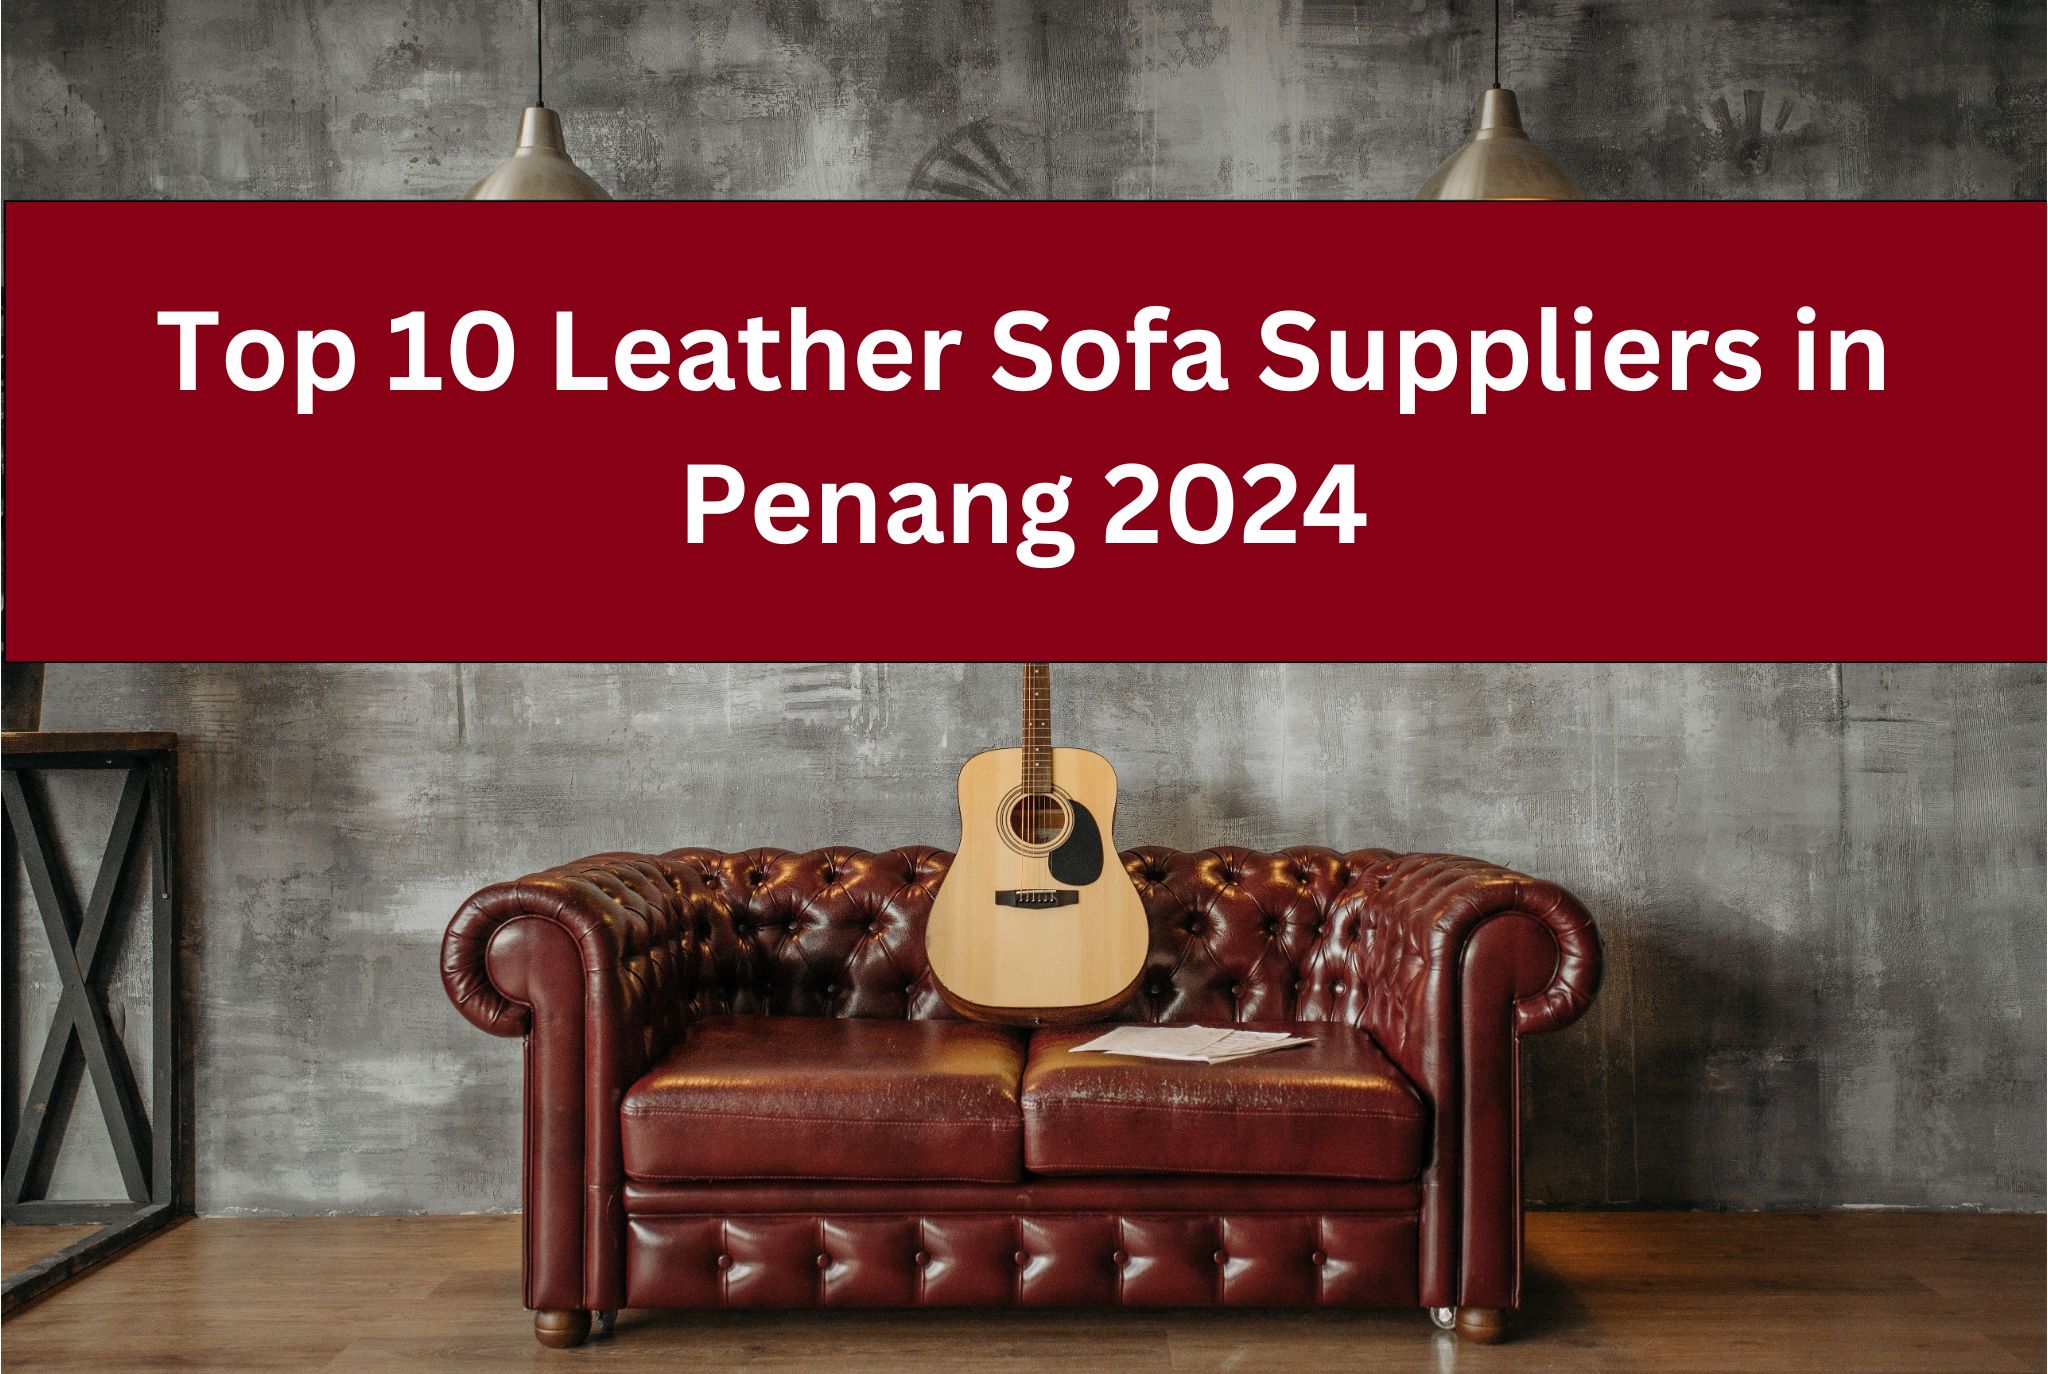 Top 10 Leather Sofa Suppliers in Penang 2024